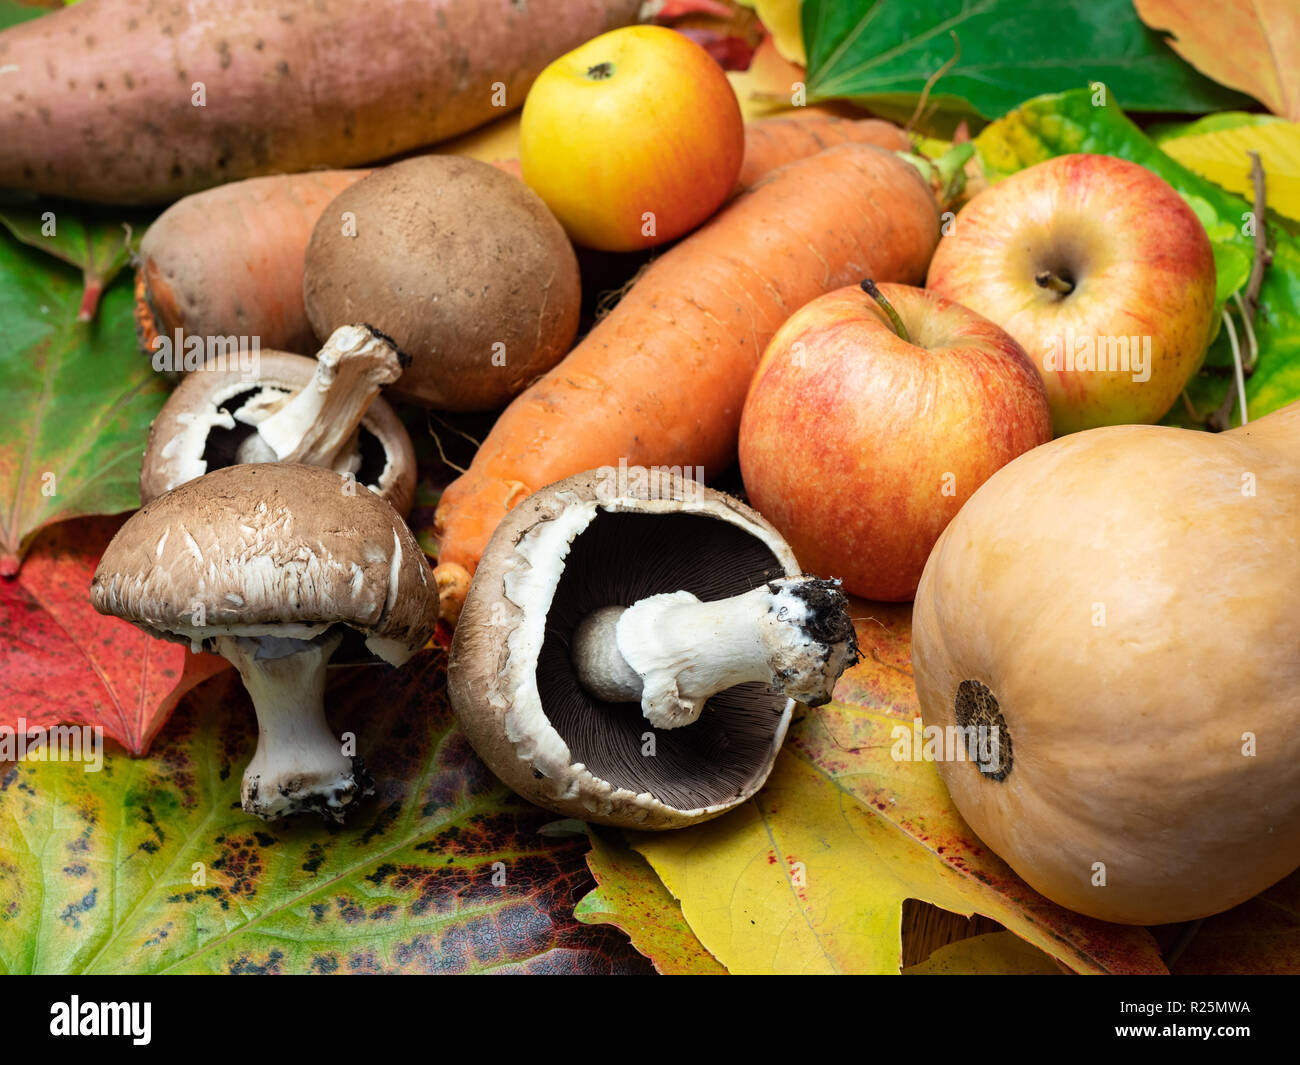 Seasonal vegetables placed on coloured autumn leaves. There are mushrooms, apples, sweet patato, butternut squash and carrots. Stock Photo